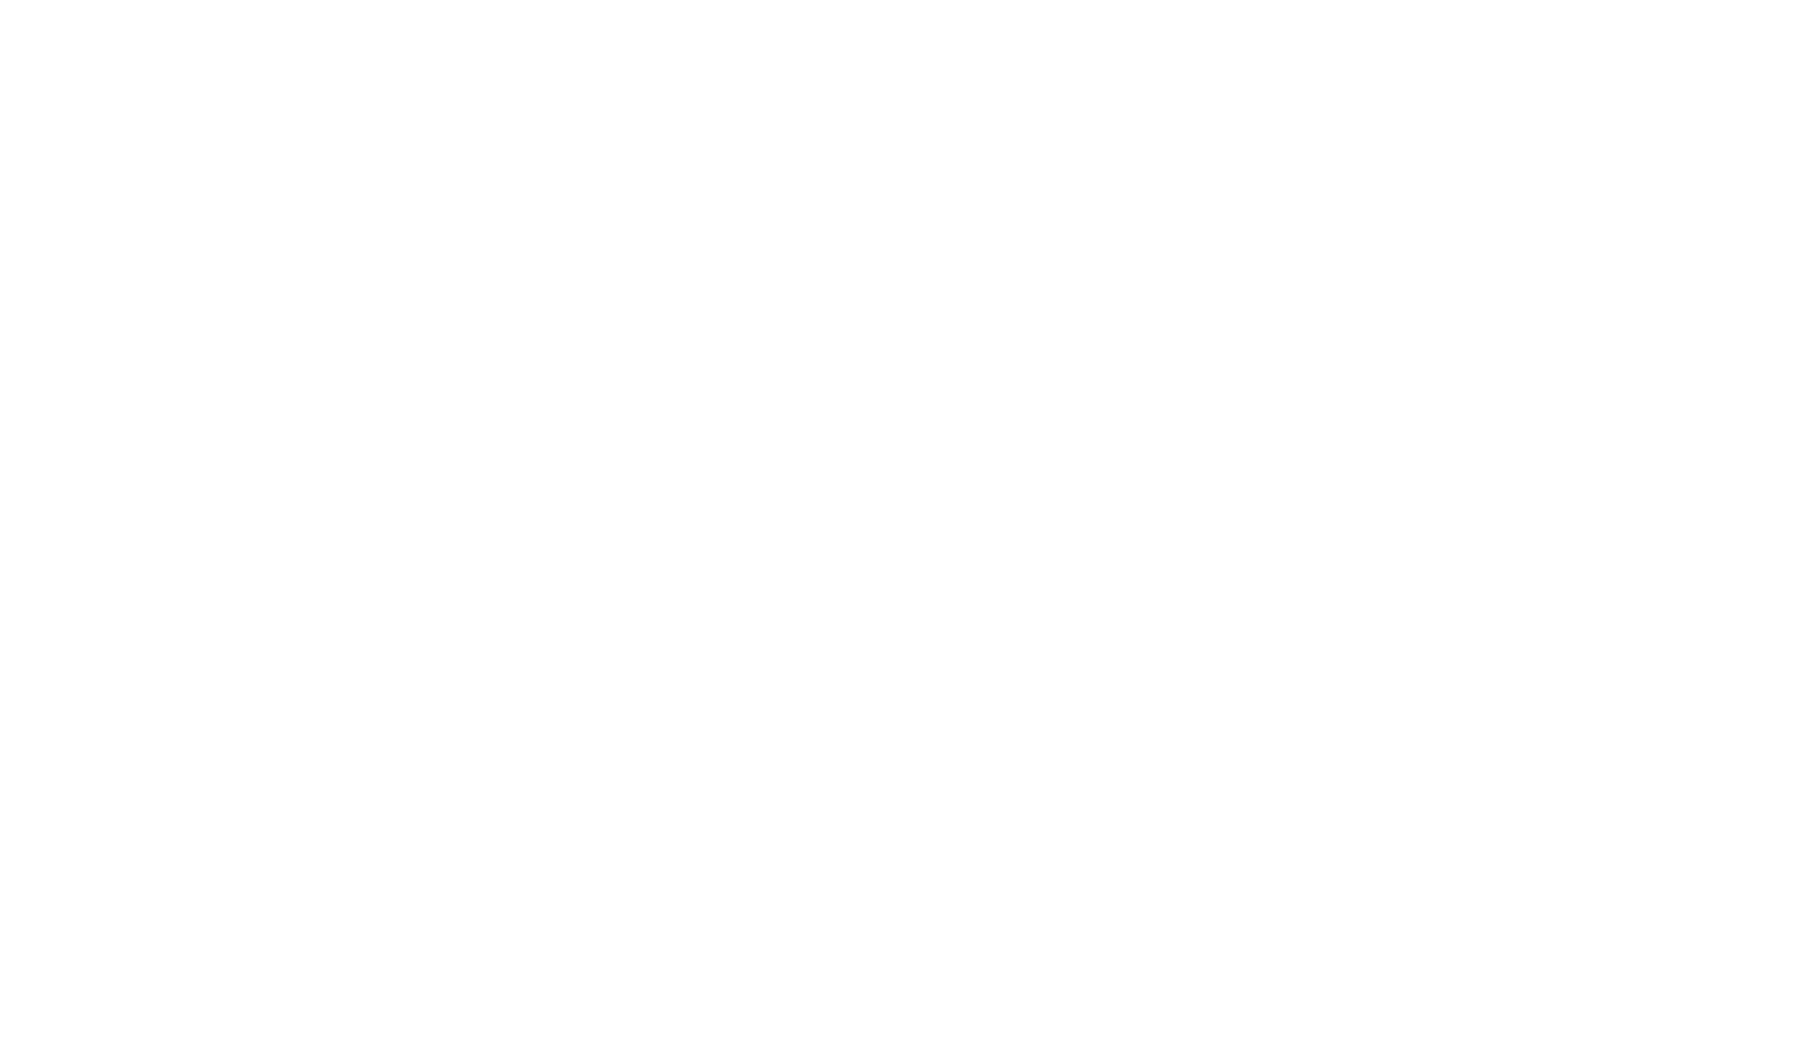 Housing Options Made for Everyone